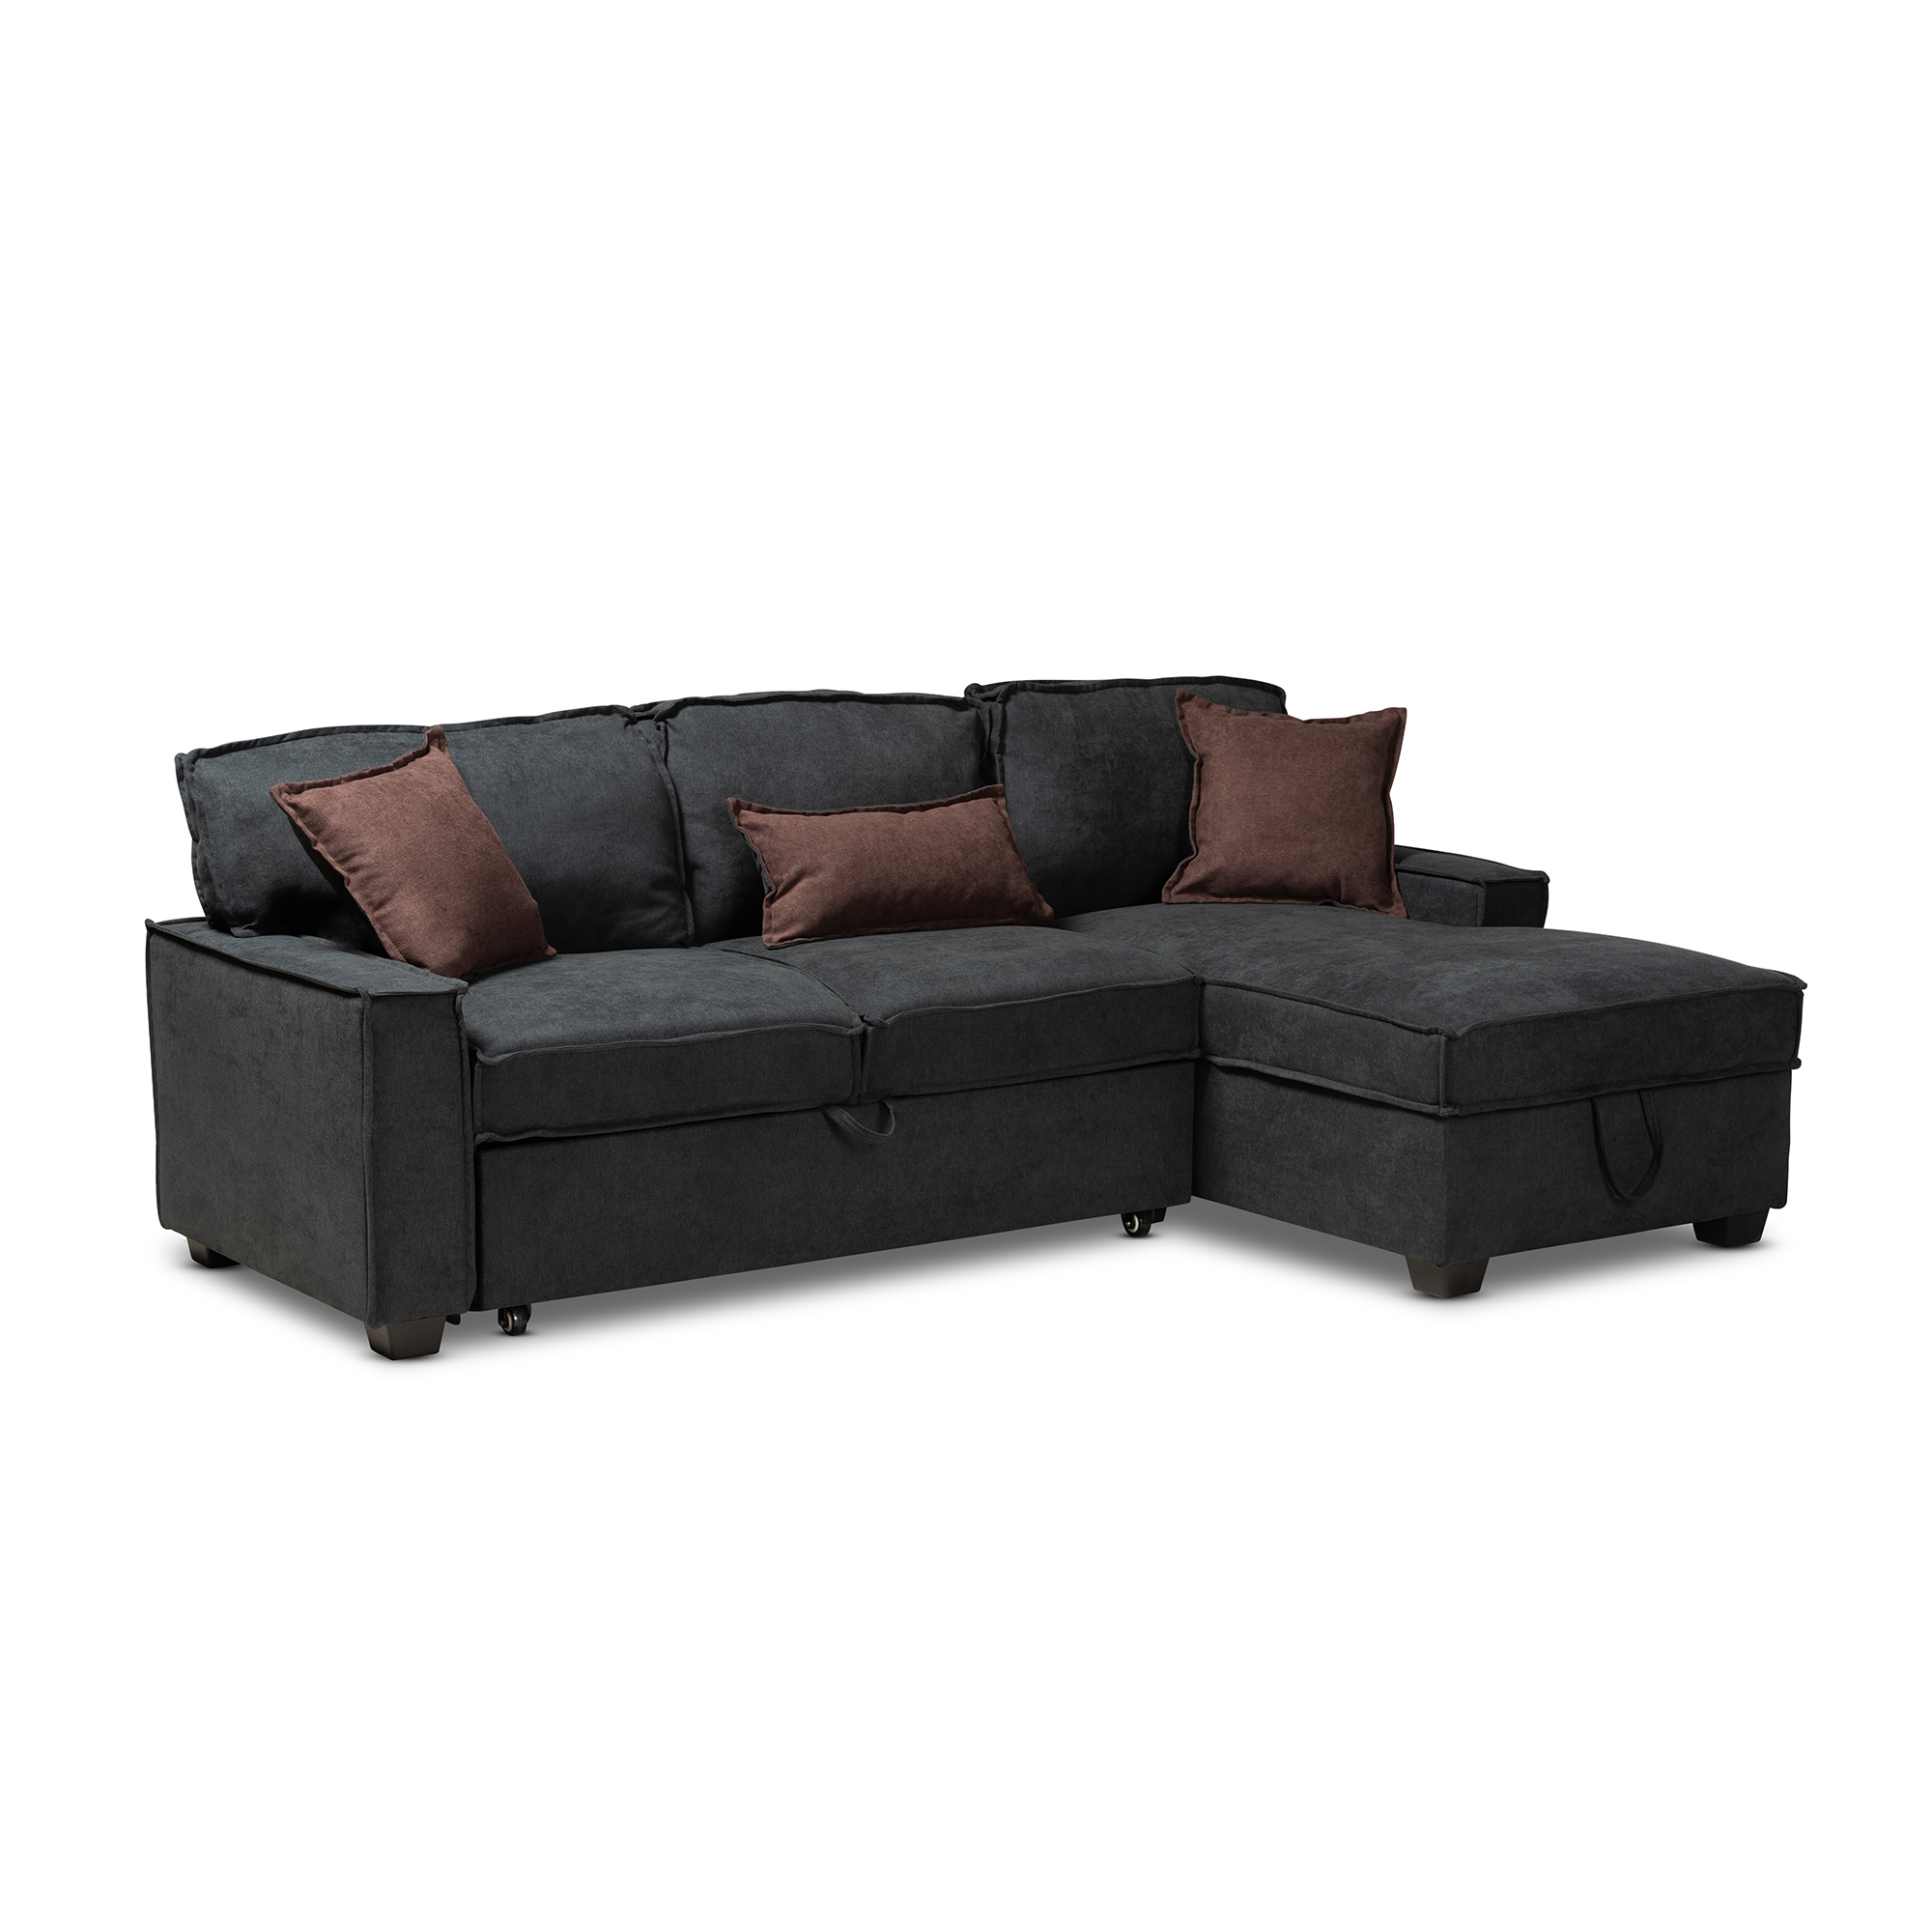 Baxton Studio Emile Modern and Contemporary Dark Grey Fabric Upholstered Right Facing Storage Sectional Sofa with Pull-Out Bed